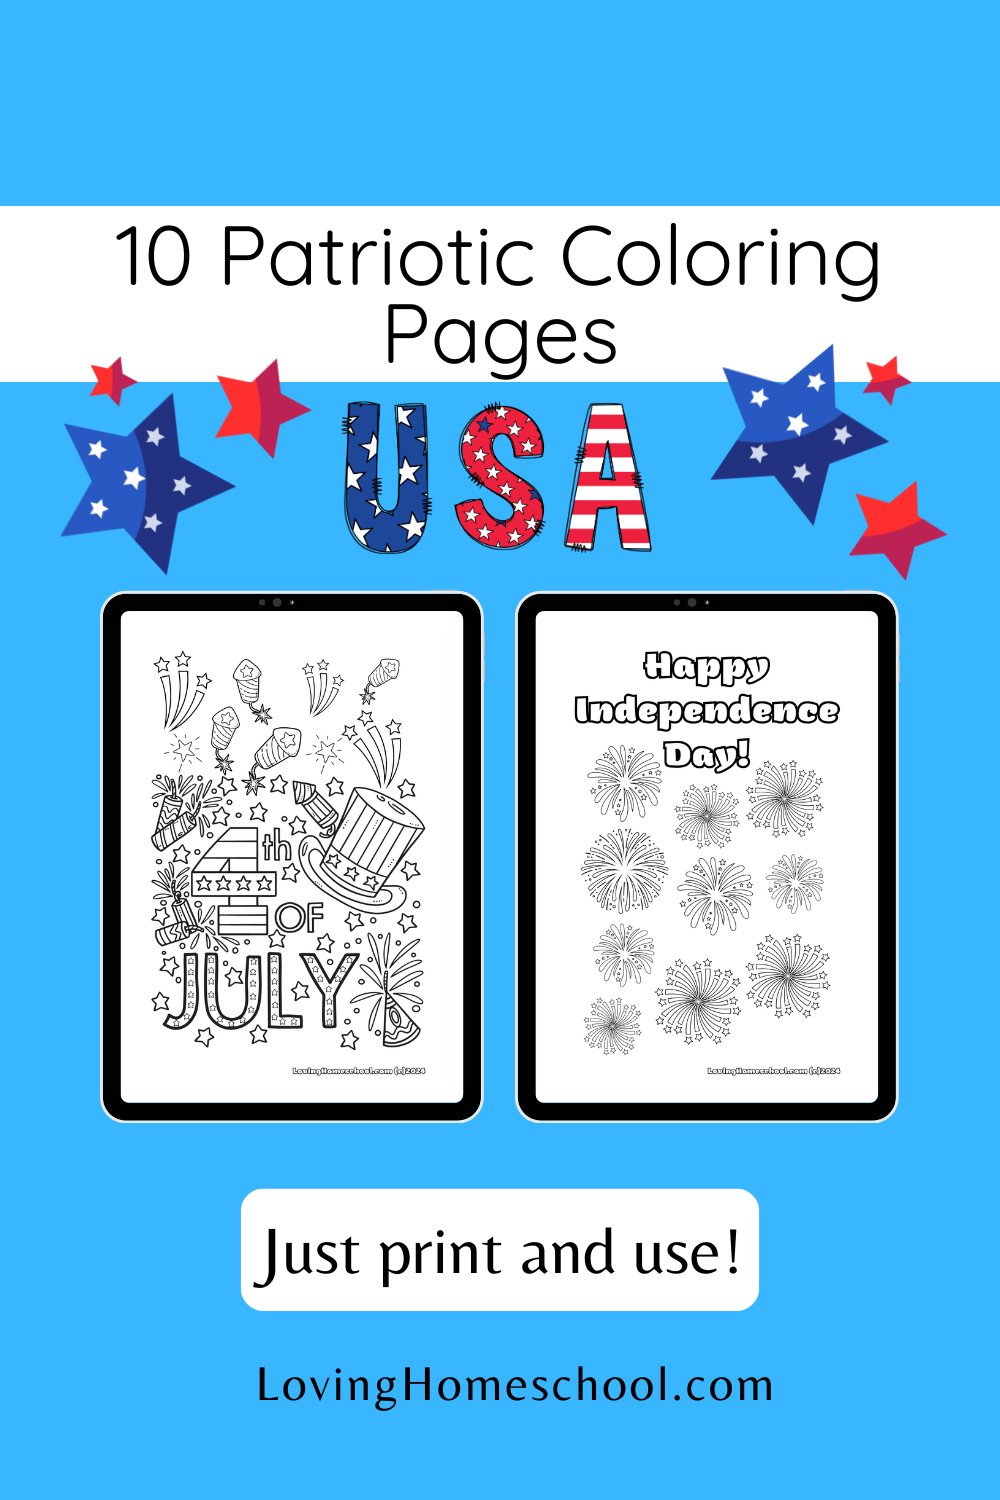 10 Patriotic Coloring Pages Pinterest Pin